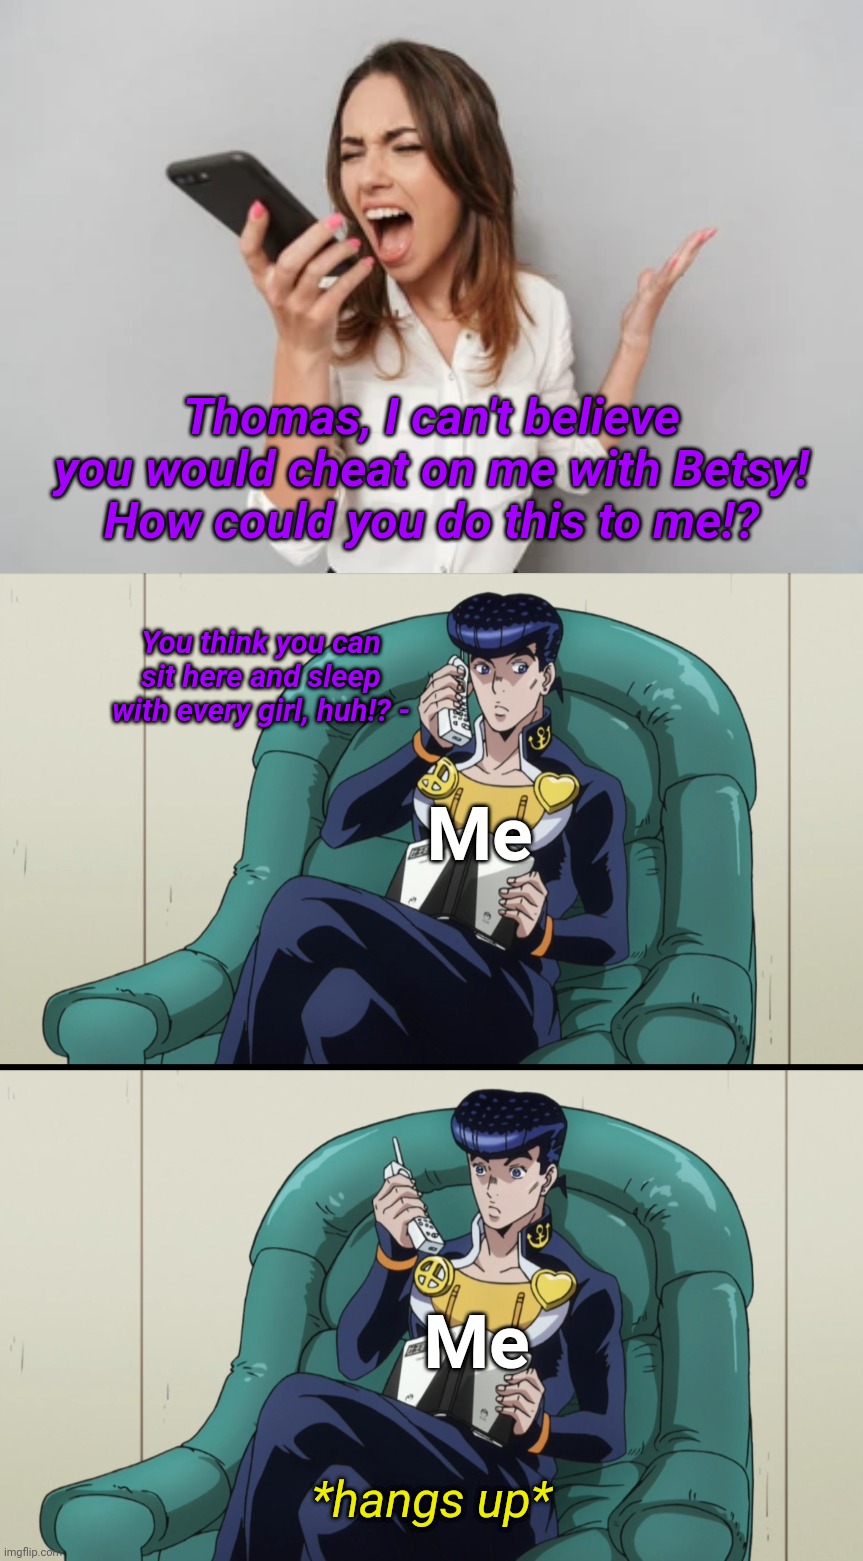 Got the wrong phone number |  Thomas, I can't believe you would cheat on me with Betsy! How could you do this to me!? You think you can sit here and sleep with every girl, huh!? -; Me; Me; *hangs up* | image tagged in memes,fun,wrong phone number,karen,jojo's bizarre adventure,oi josuke | made w/ Imgflip meme maker